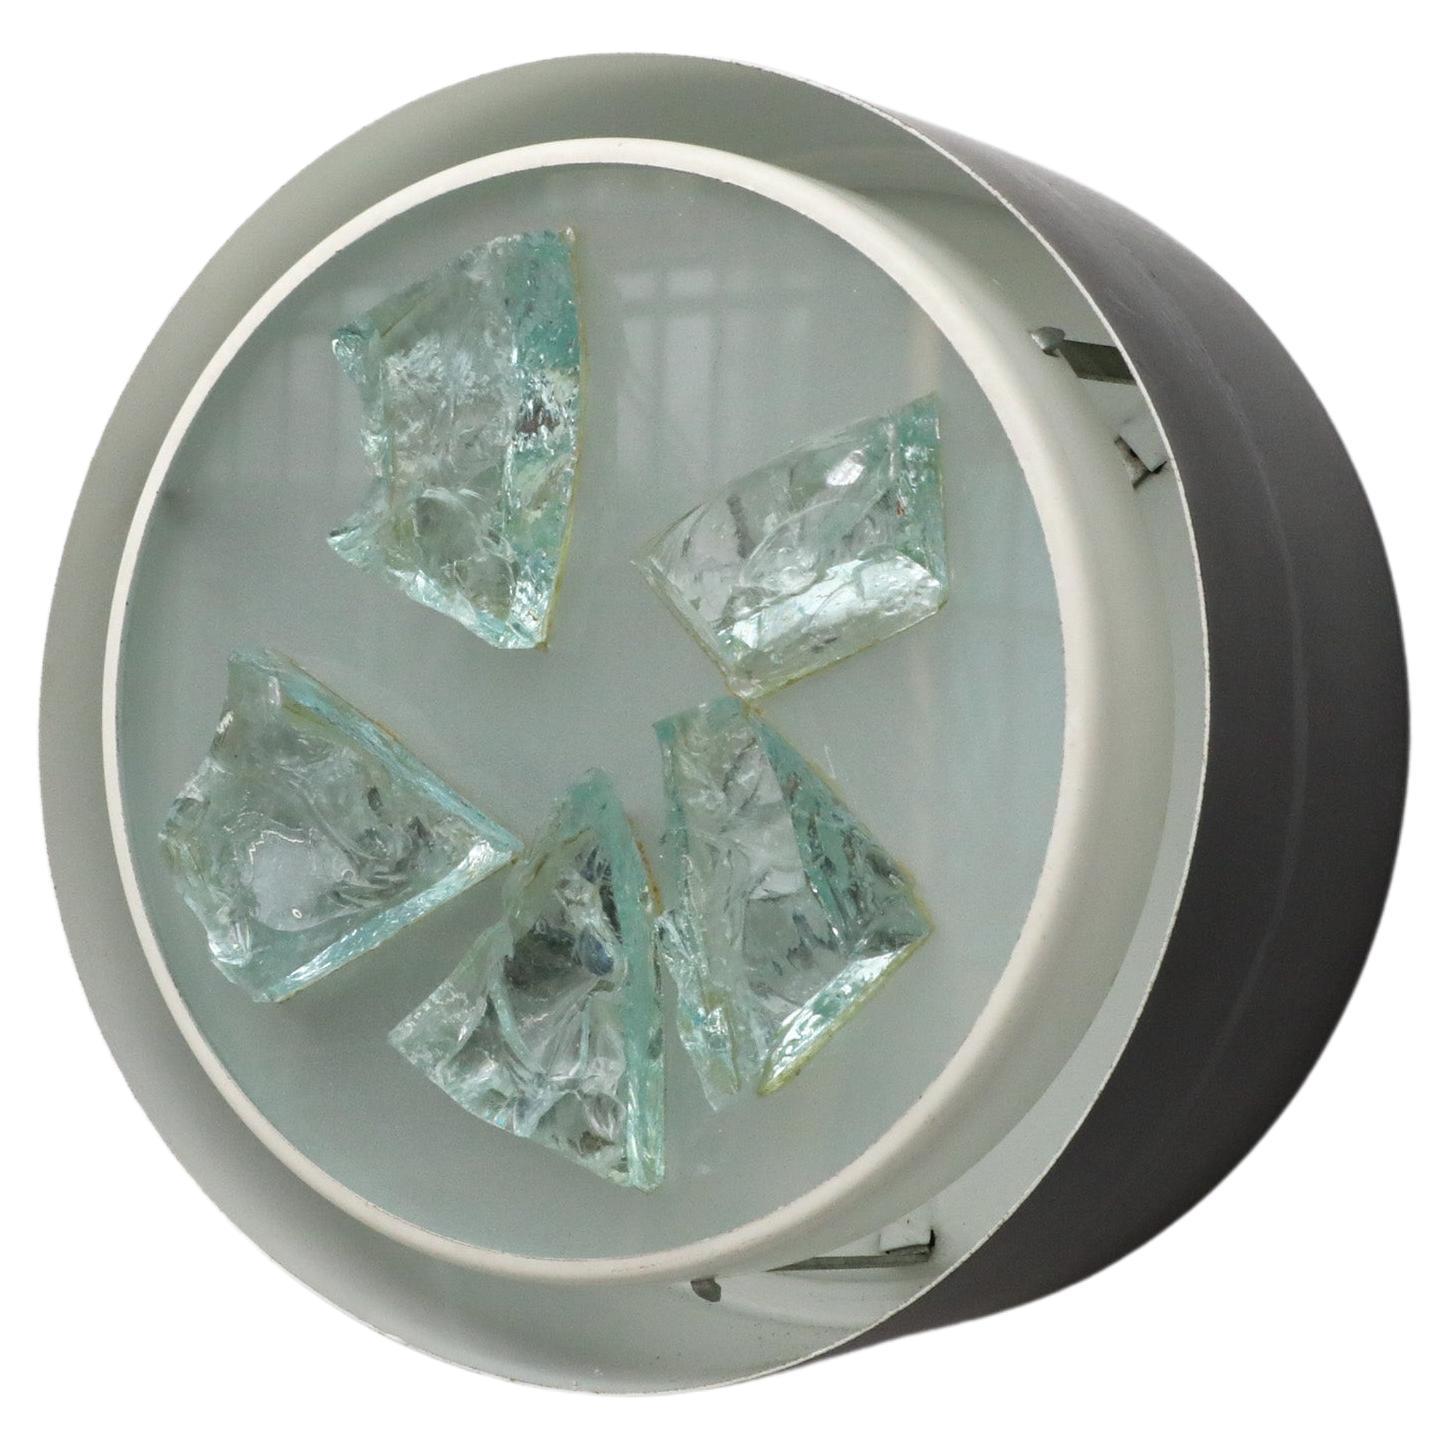 RAAK Model R-28/P Flush Ceiling Light w/ Glass Fragments & Frosted Diffuser